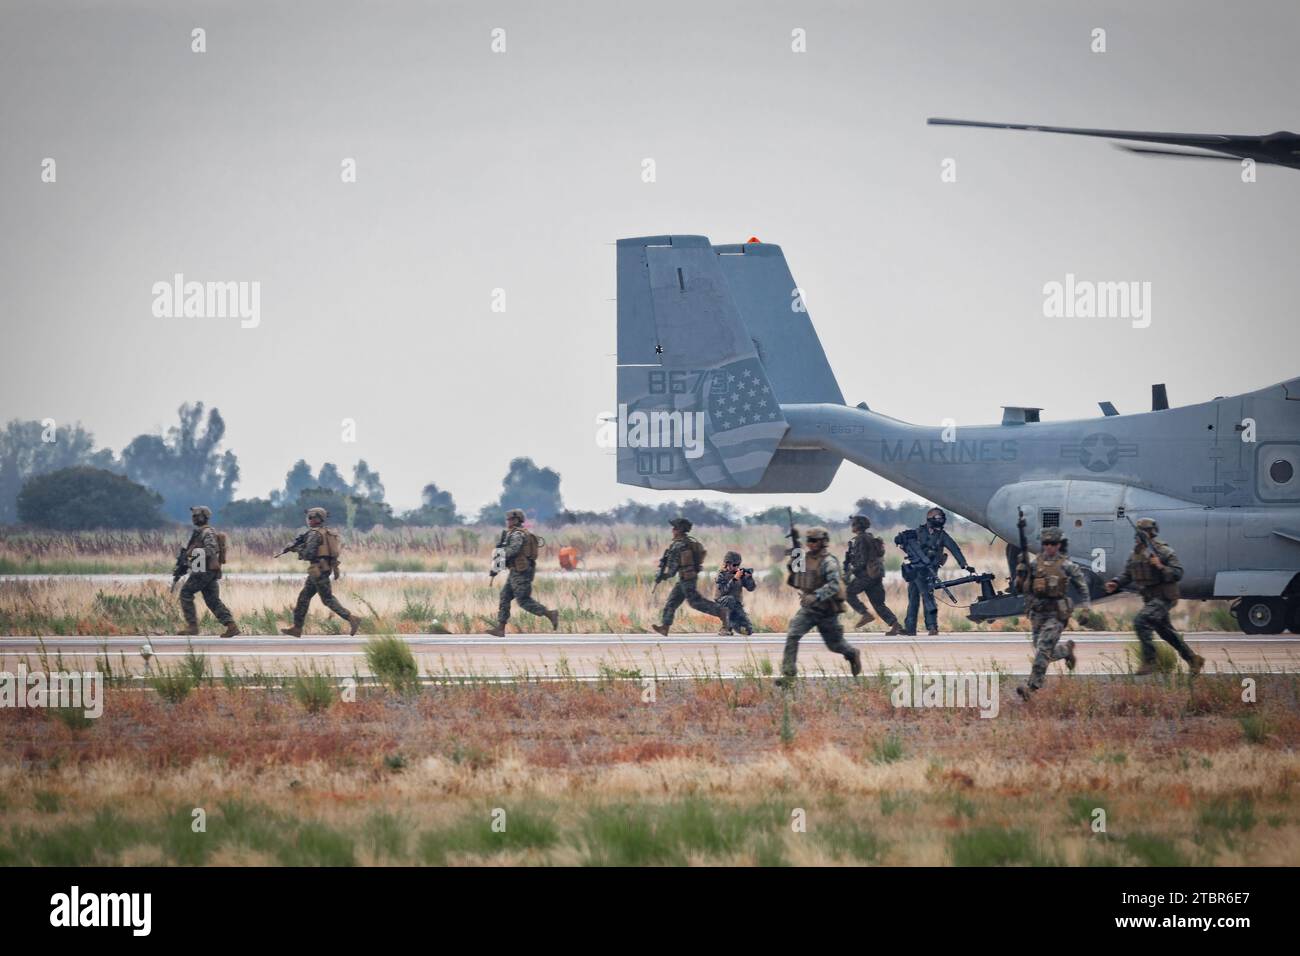 US Marines, with the Marine Air Ground Task Force (MAGTF), disembark a V-22 Osprey at America's Airshow 2023 in Miramar, California. Stock Photo